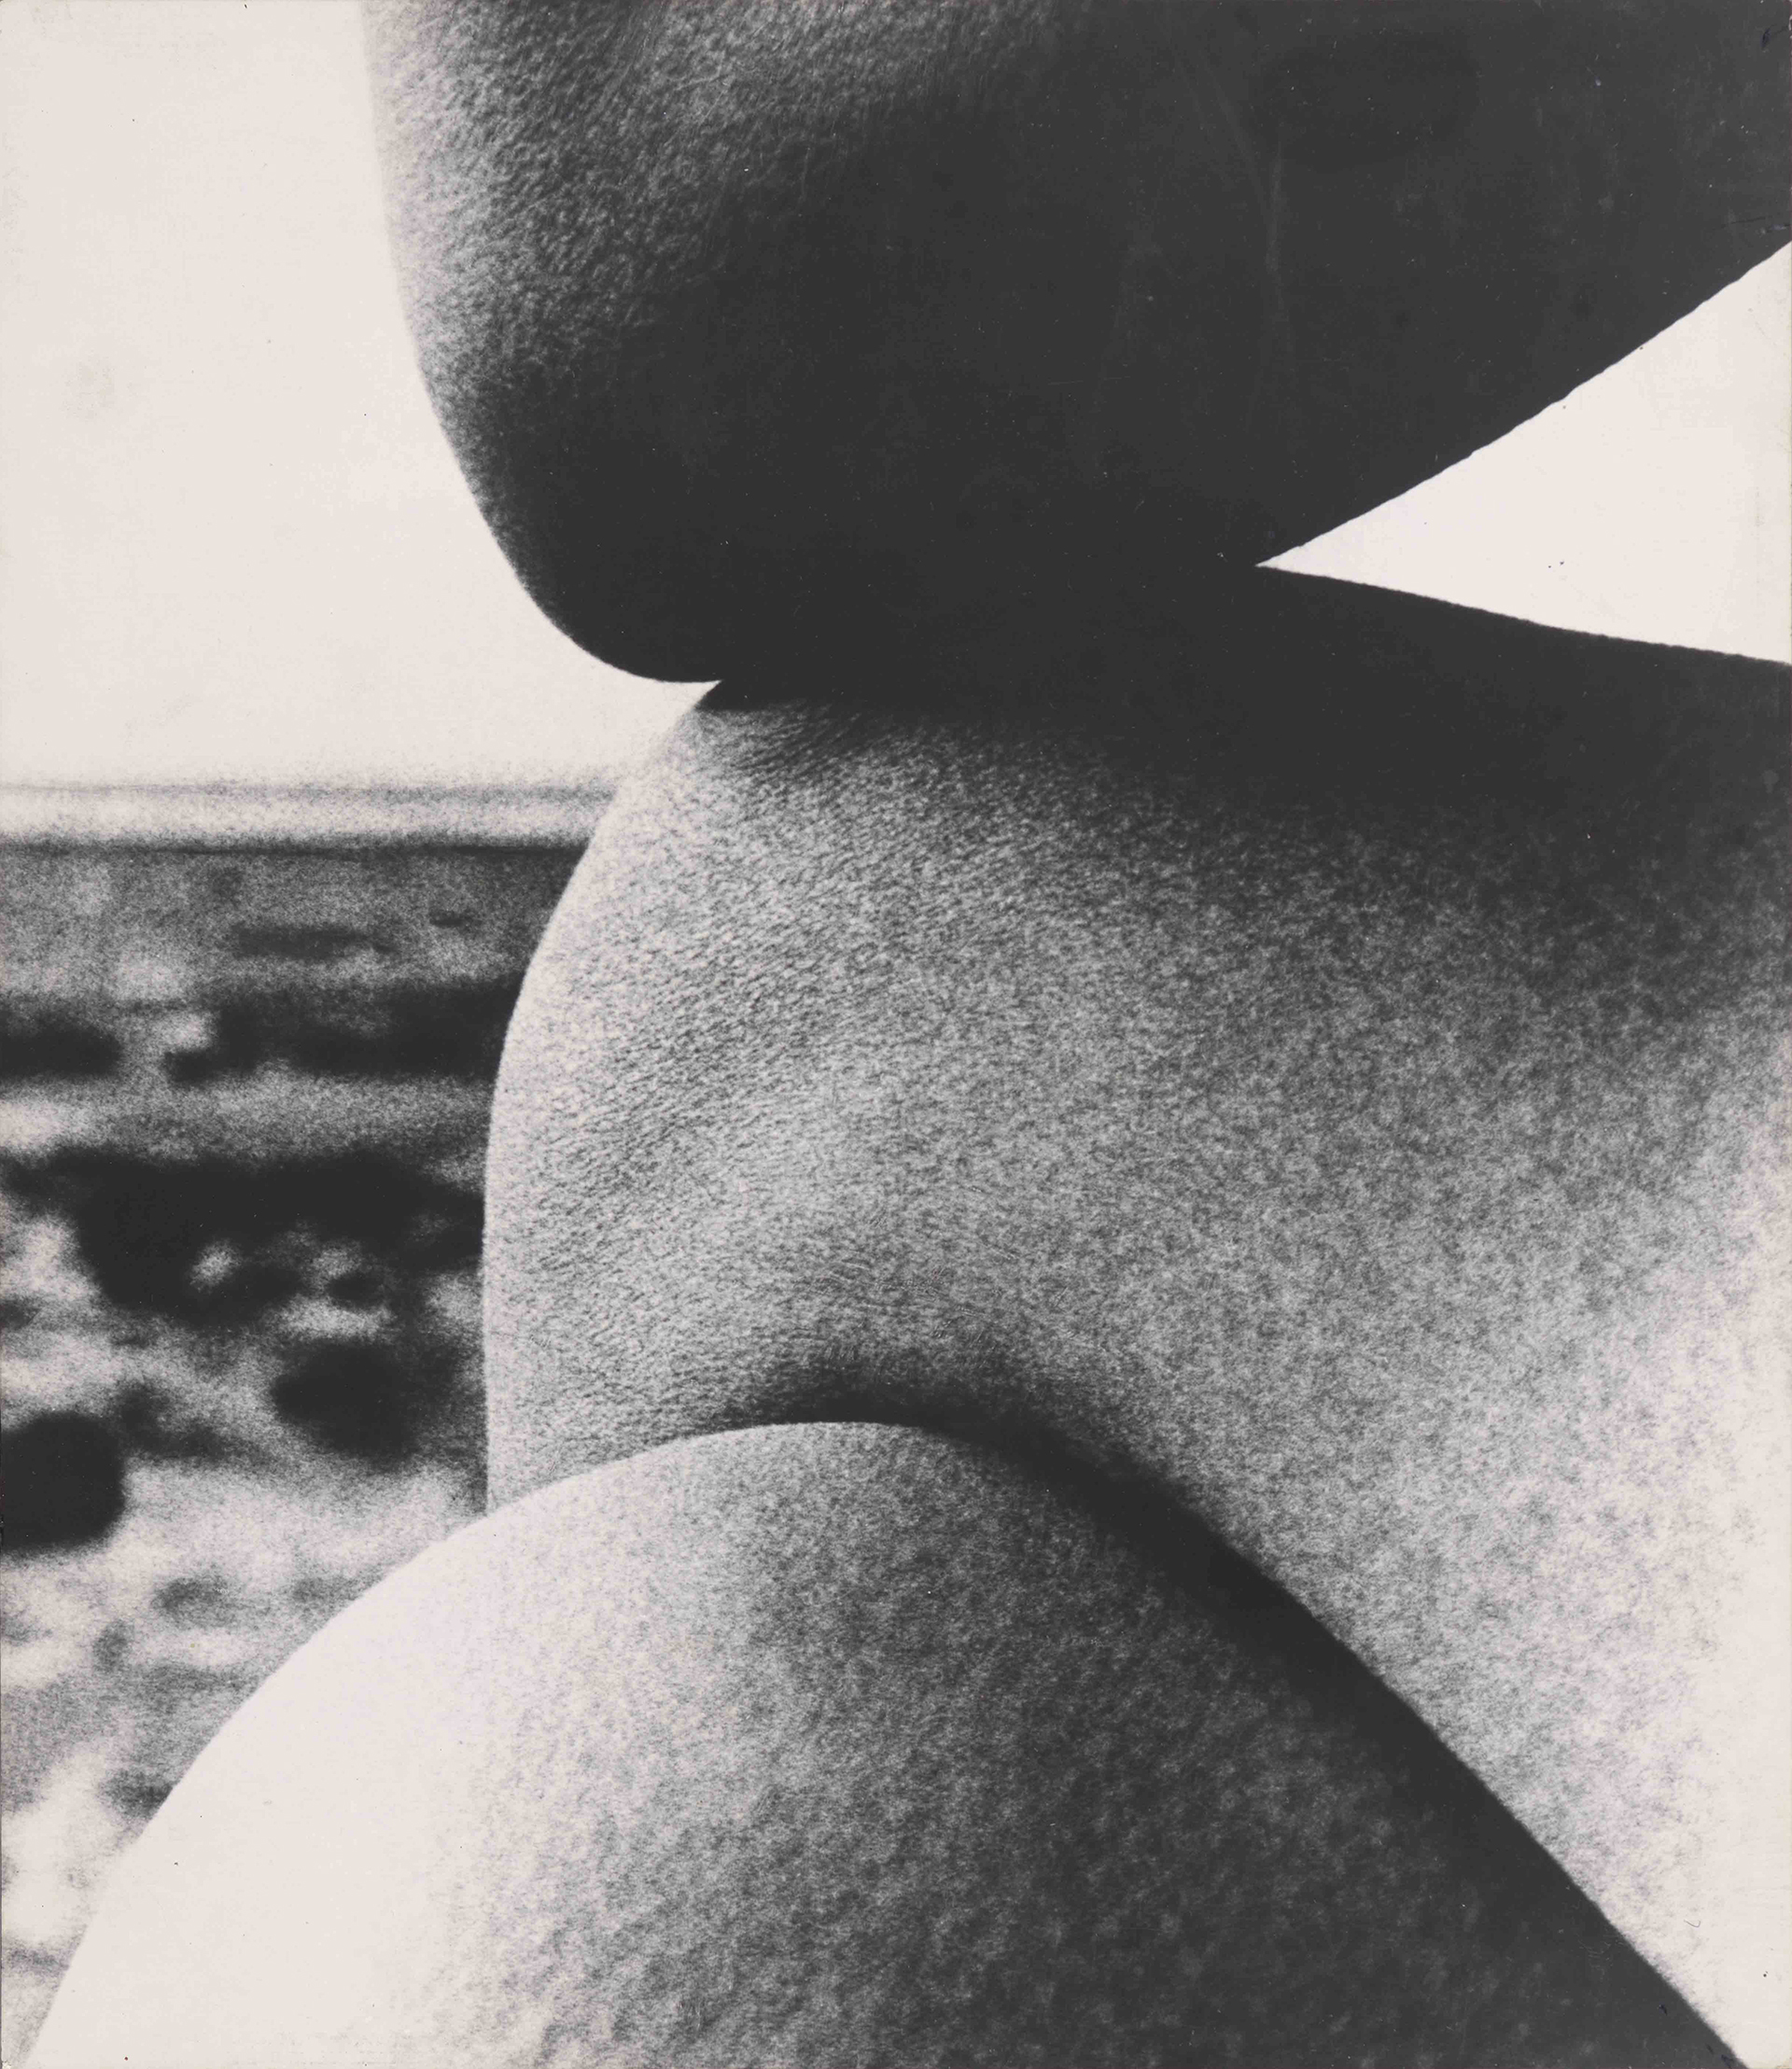 A black and white image showing crossed legs and an elbow. The image is zoomed in so the flesh might be rocks or pebbles.